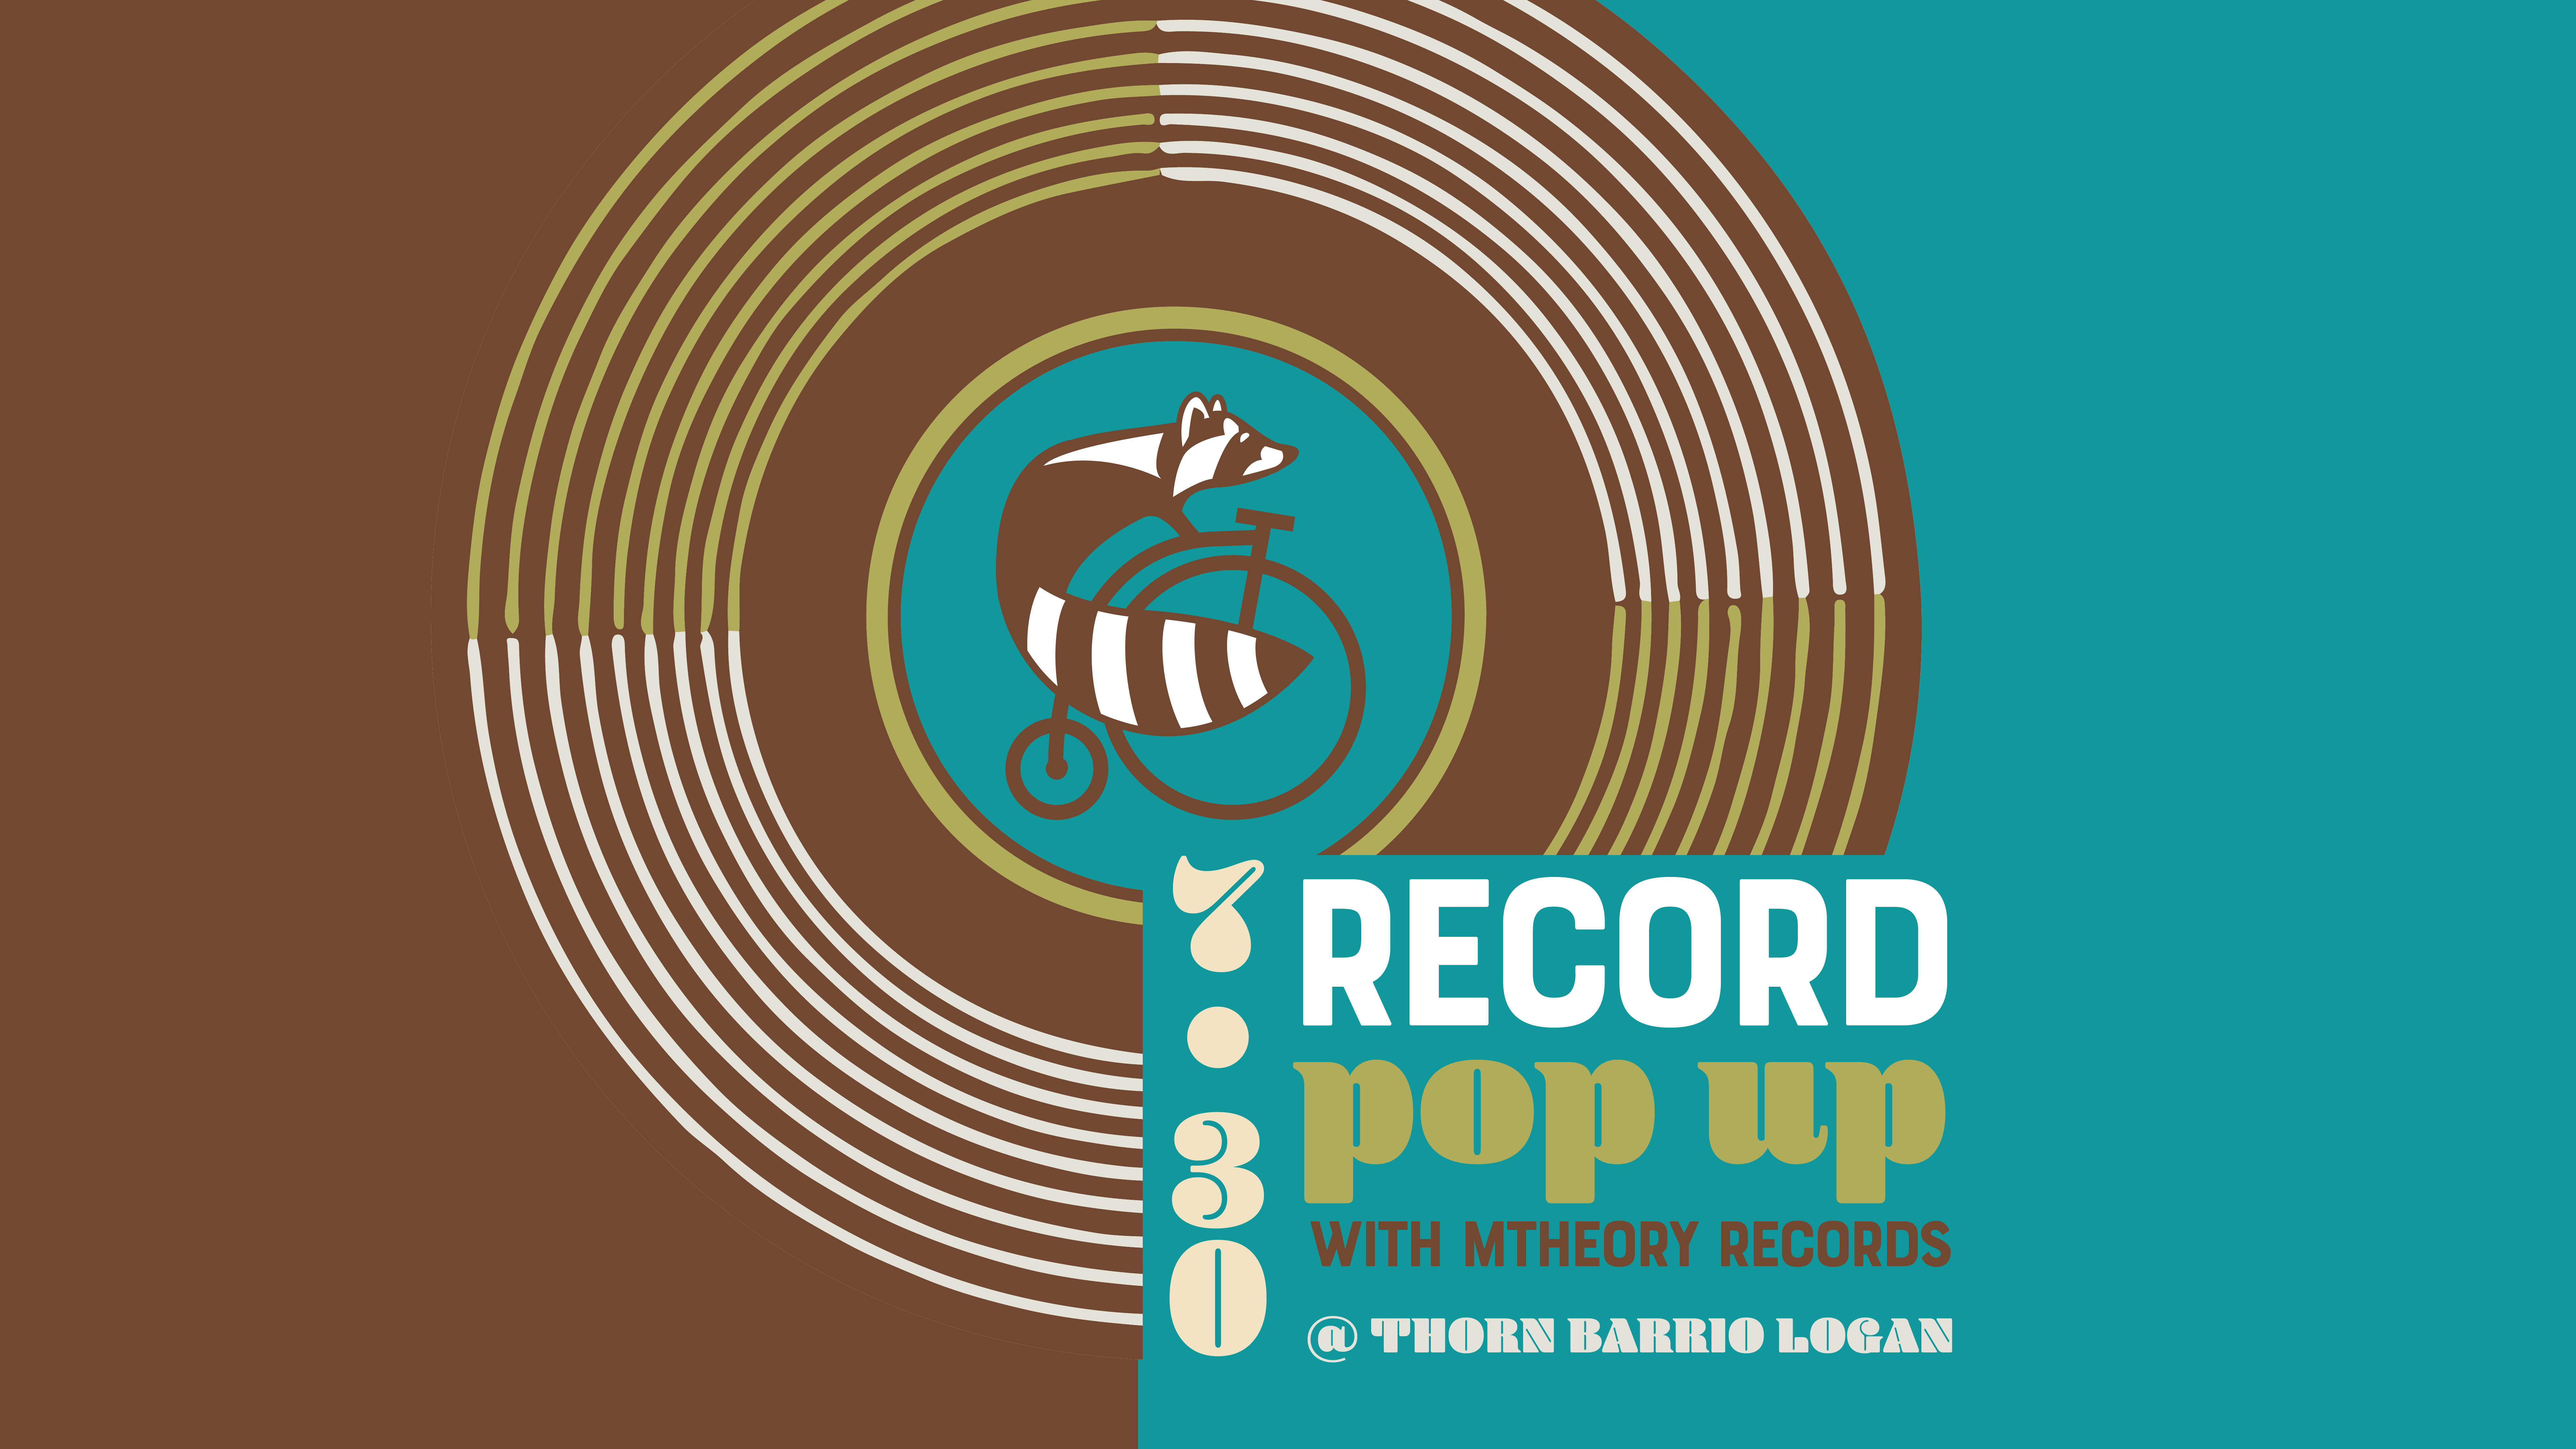 graphic for record pop up at thorn. Brown record on front with the thorn logo in the middle. blue background